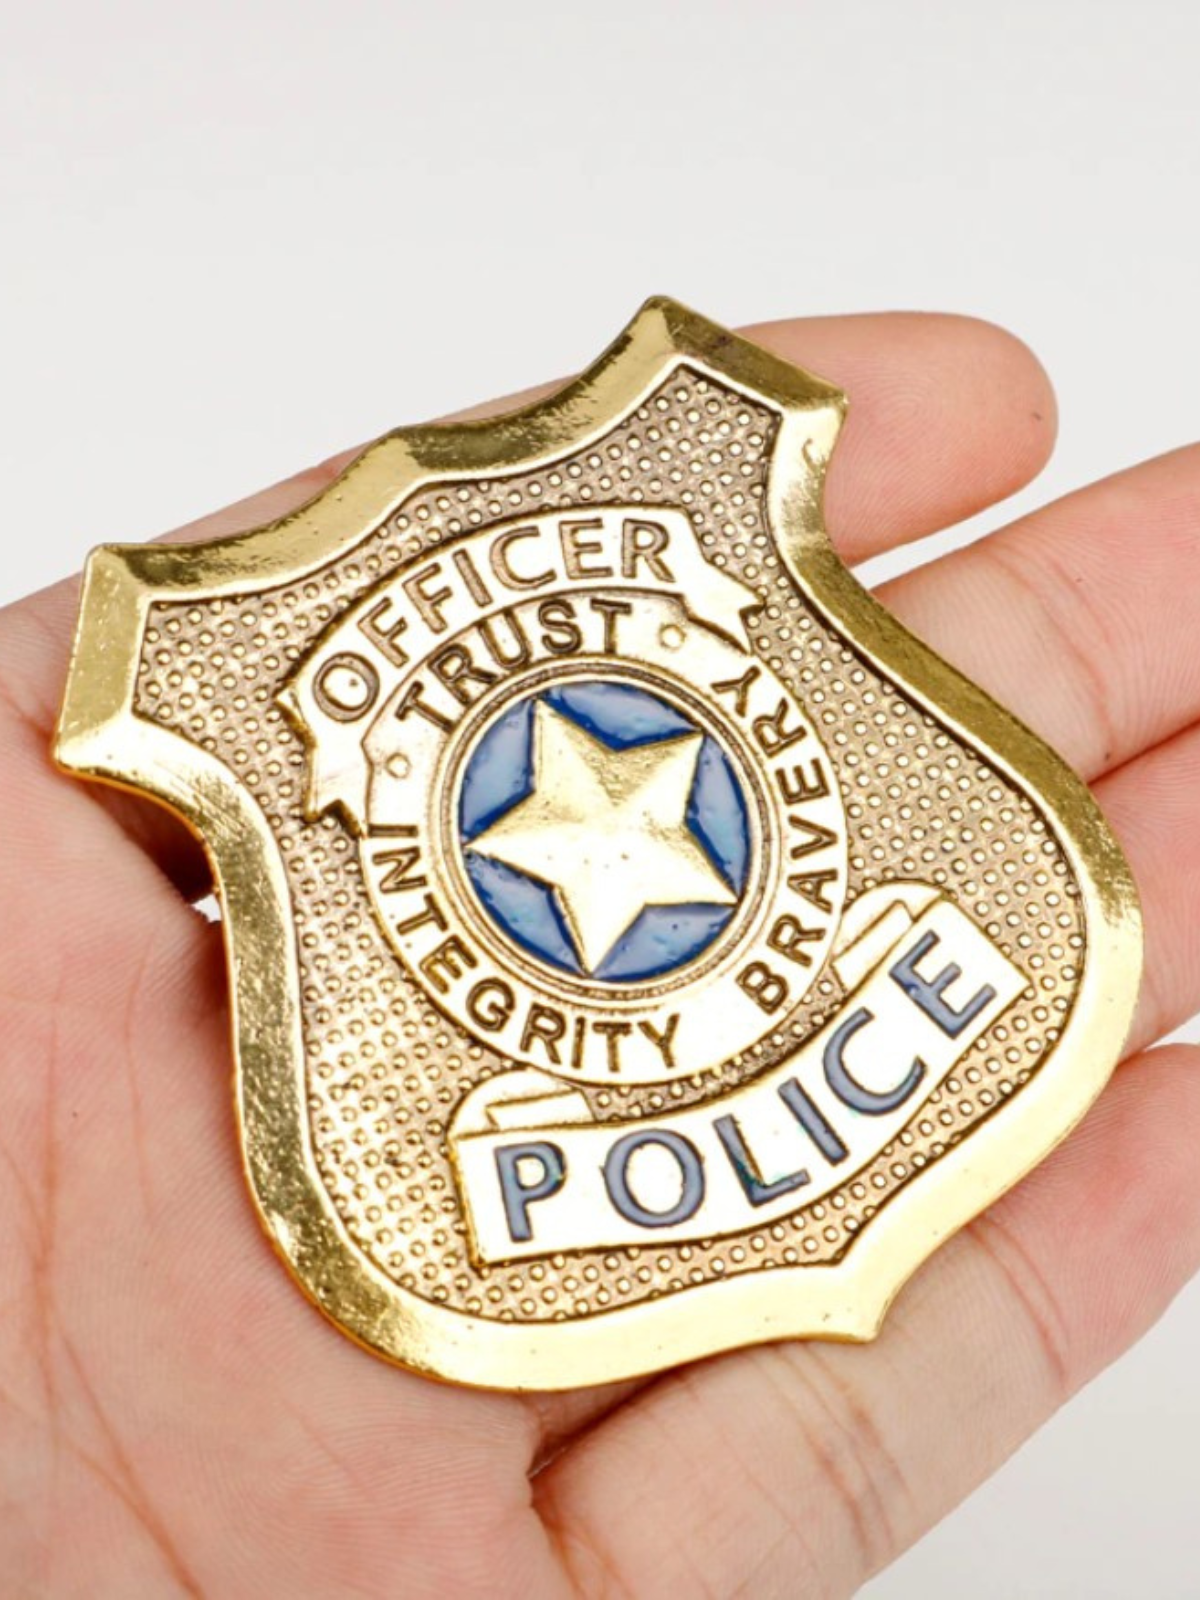 Little Officer Cosplay Police Badge